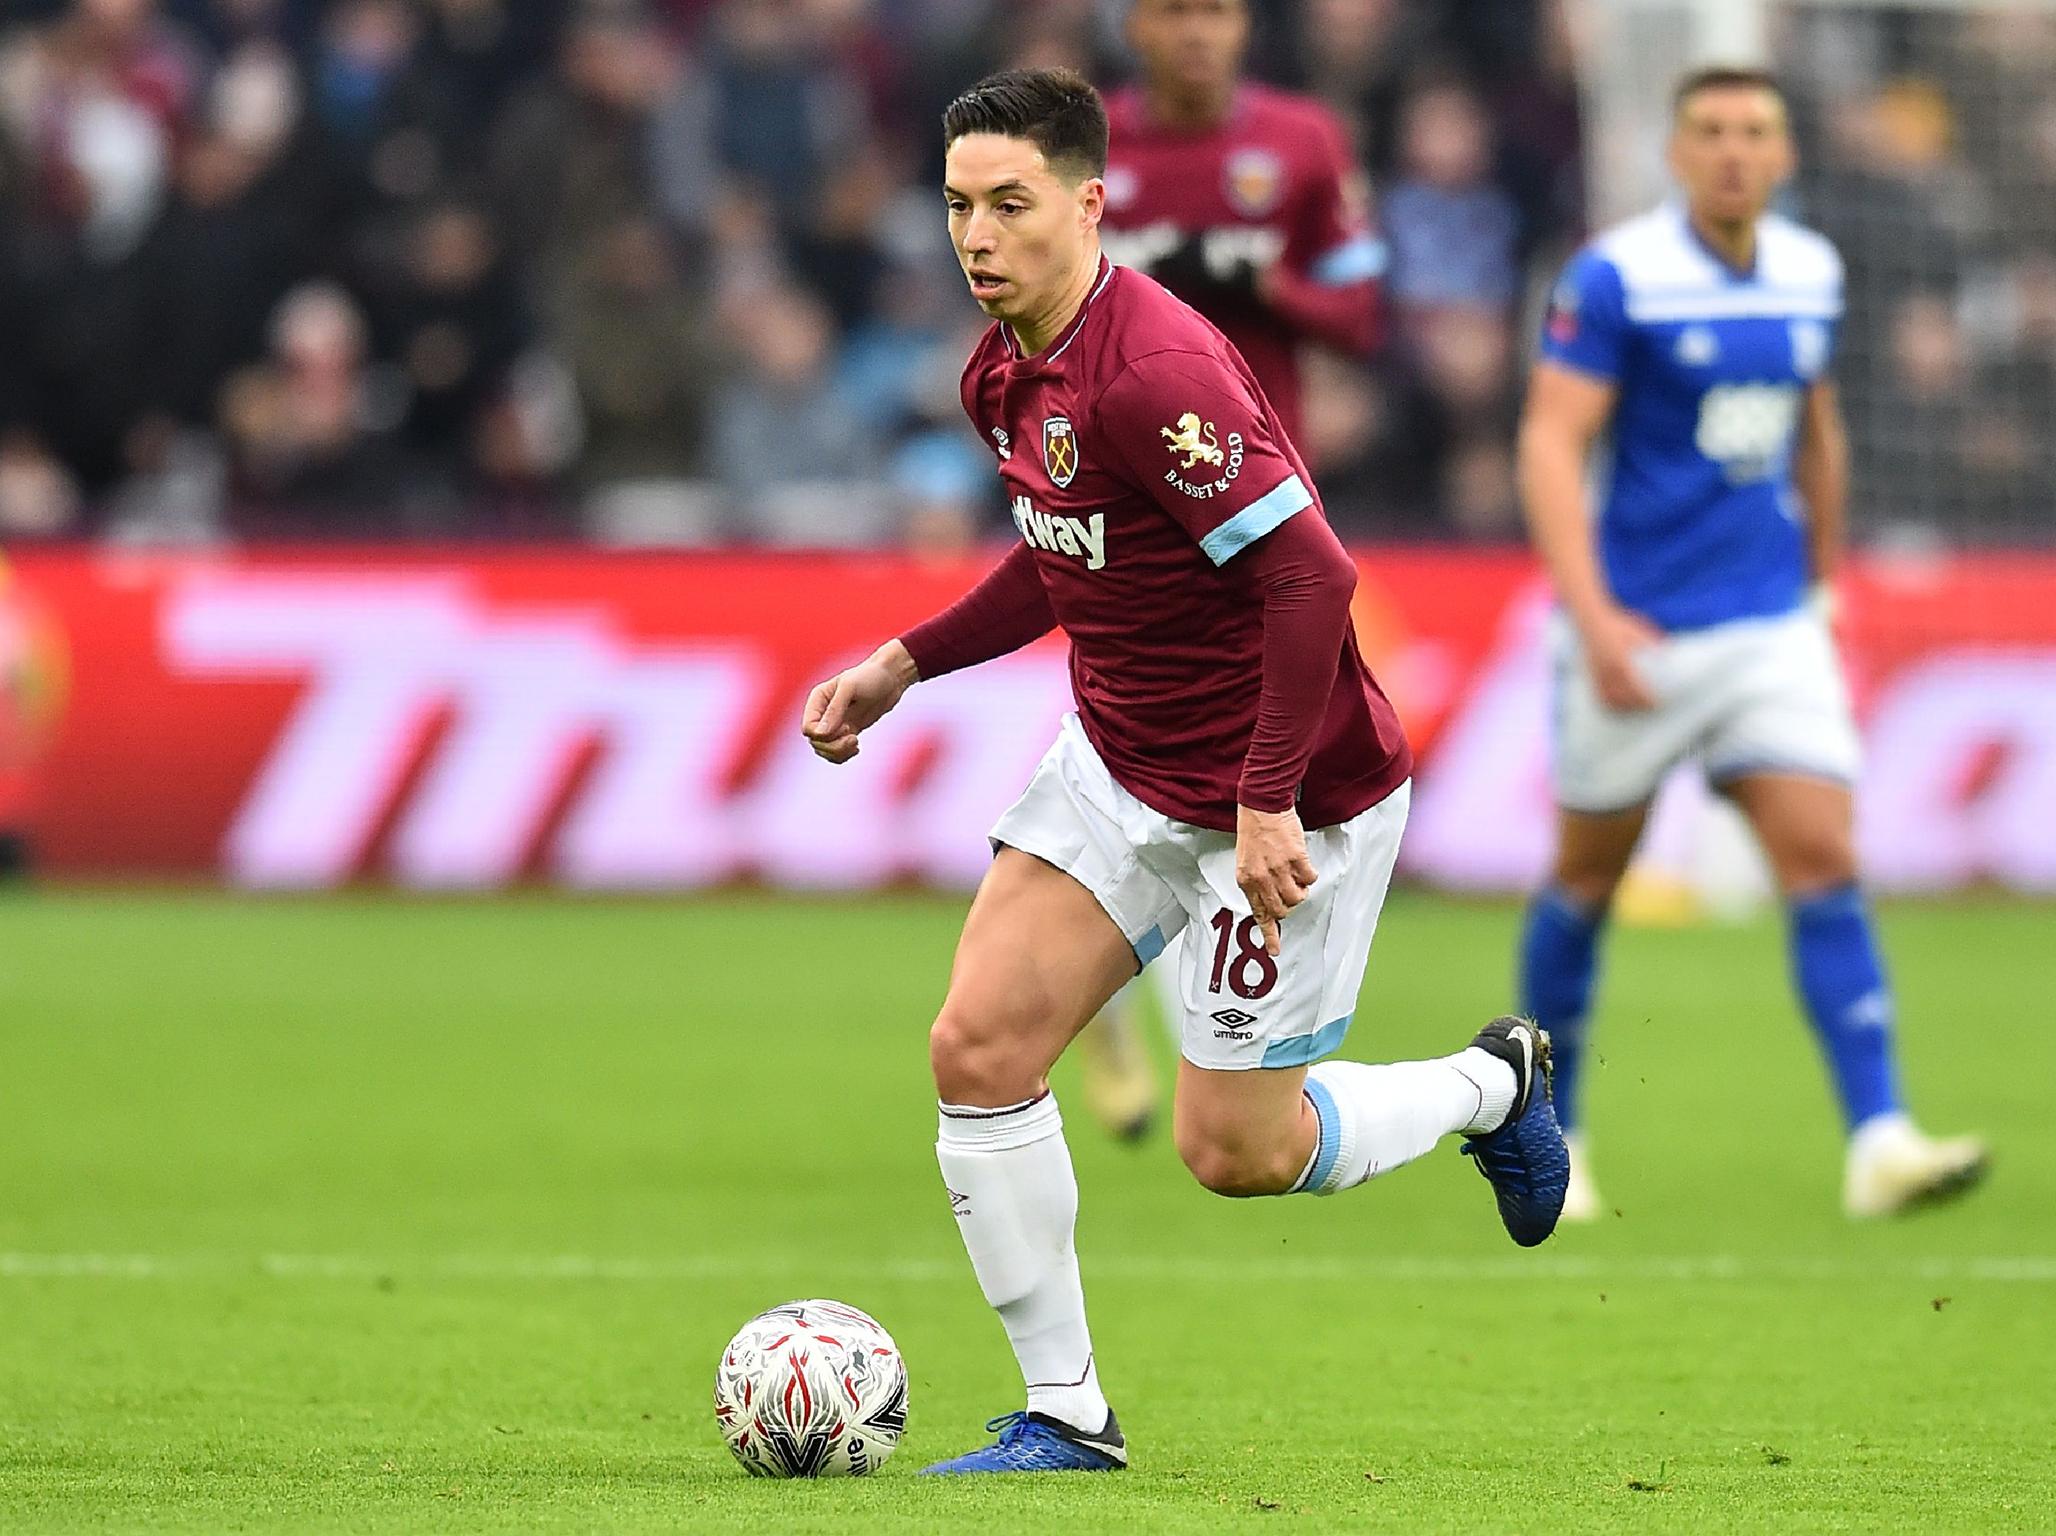 Nasri is set to face his former club after starting in the FA Cup (AFP/Getty)